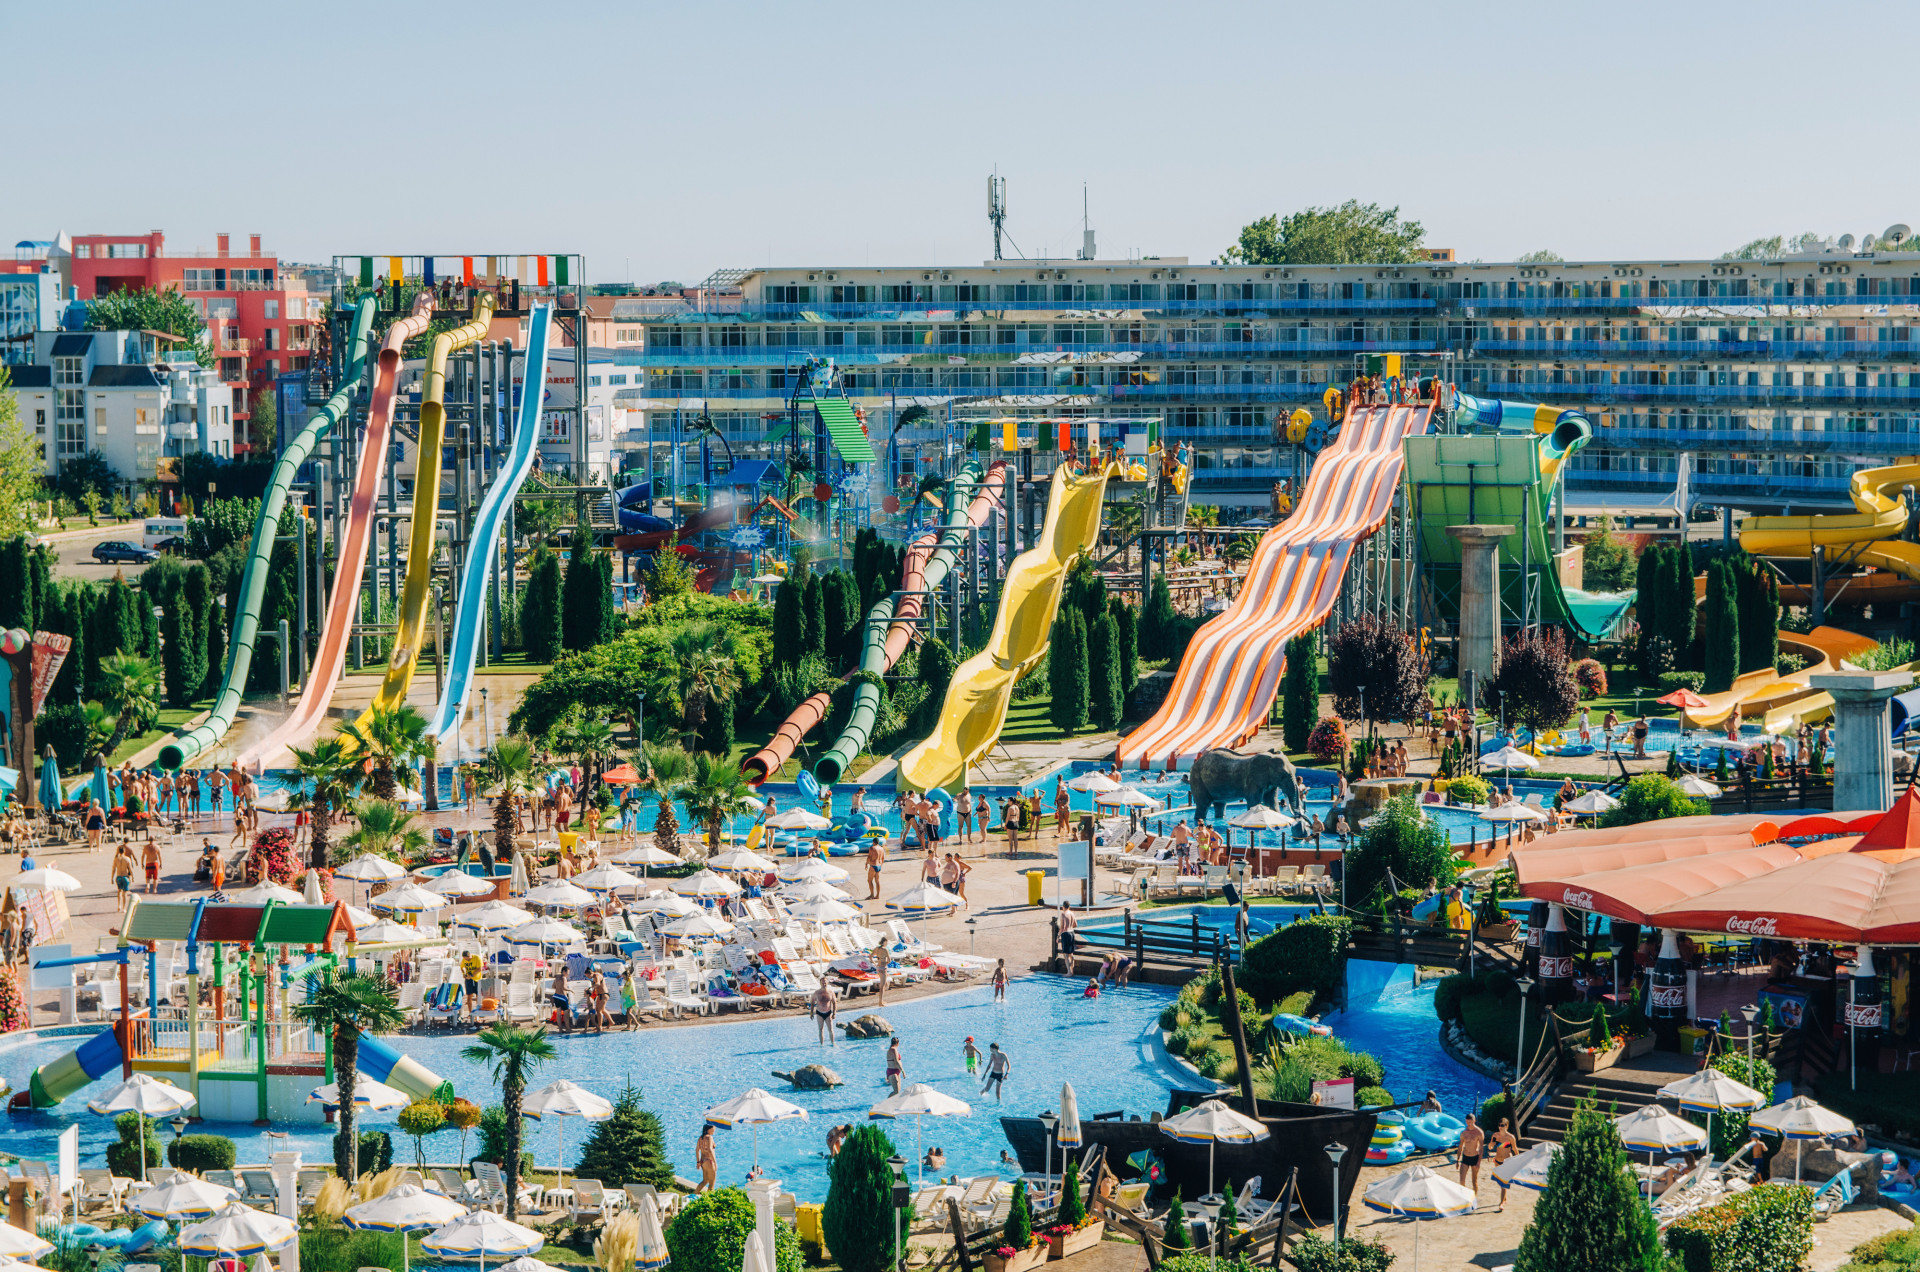 The Action Aquapark in Sunny Beach, Bulgaria, is the first water park in the country, and it has more than 30 rides.